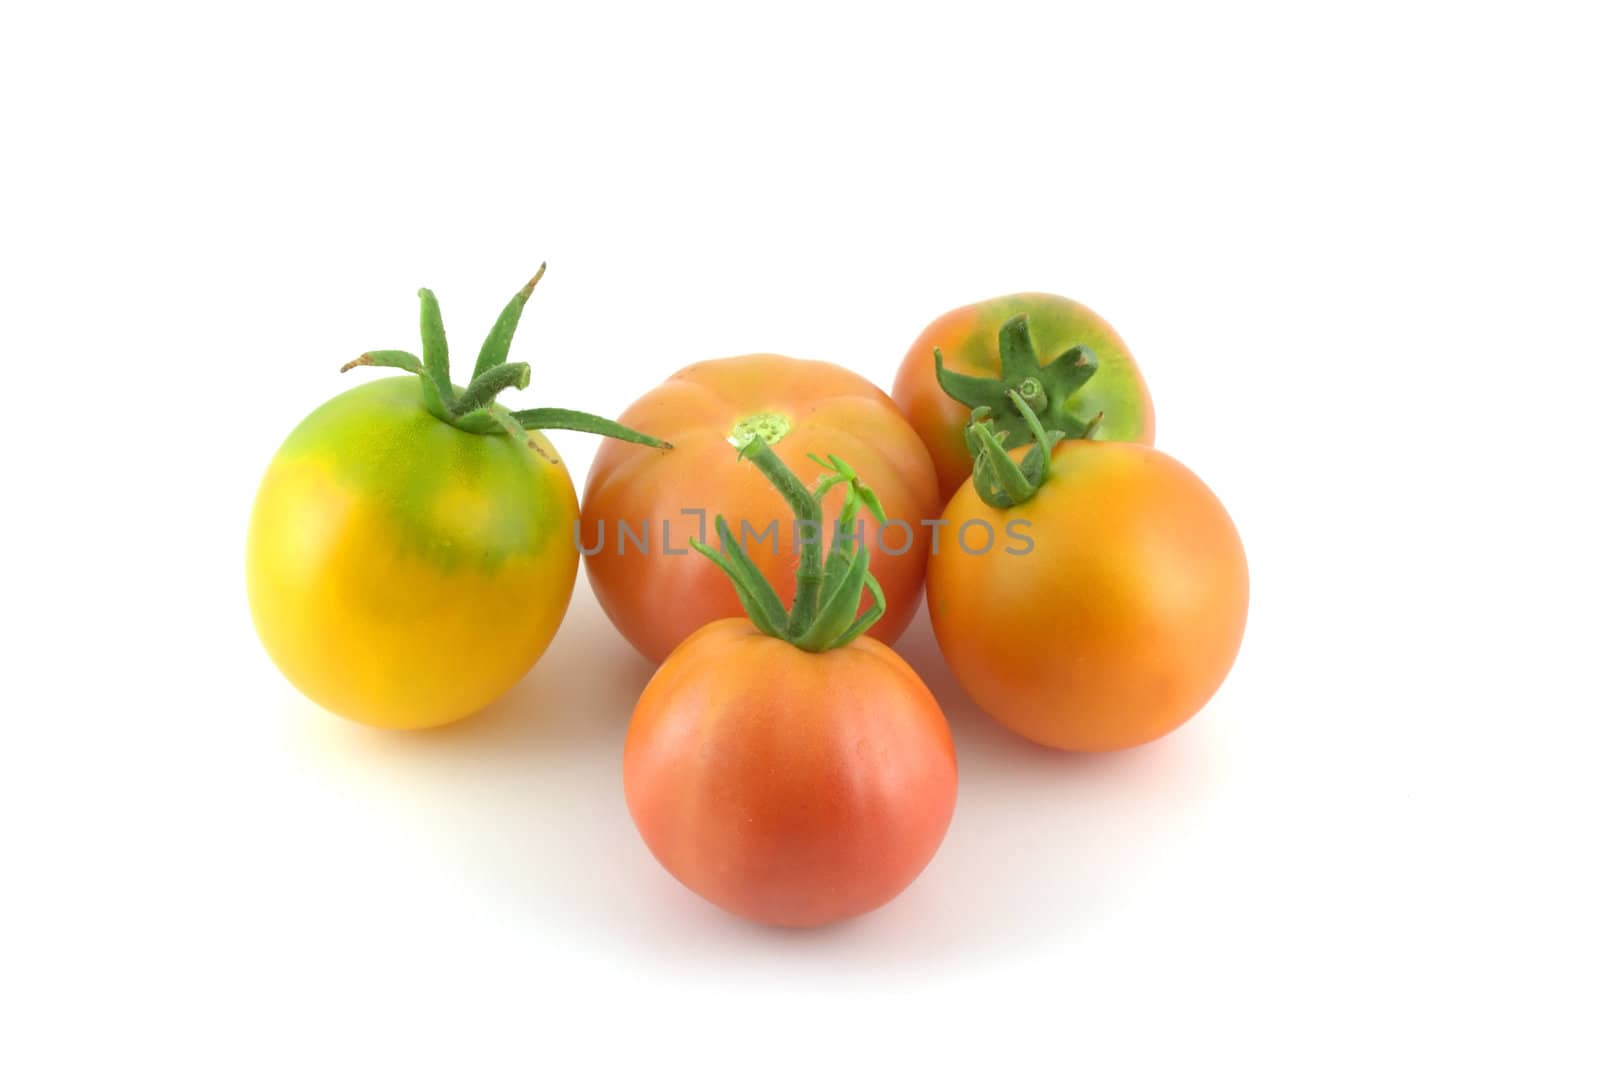 Ripe tomatoes on white background by sergpet